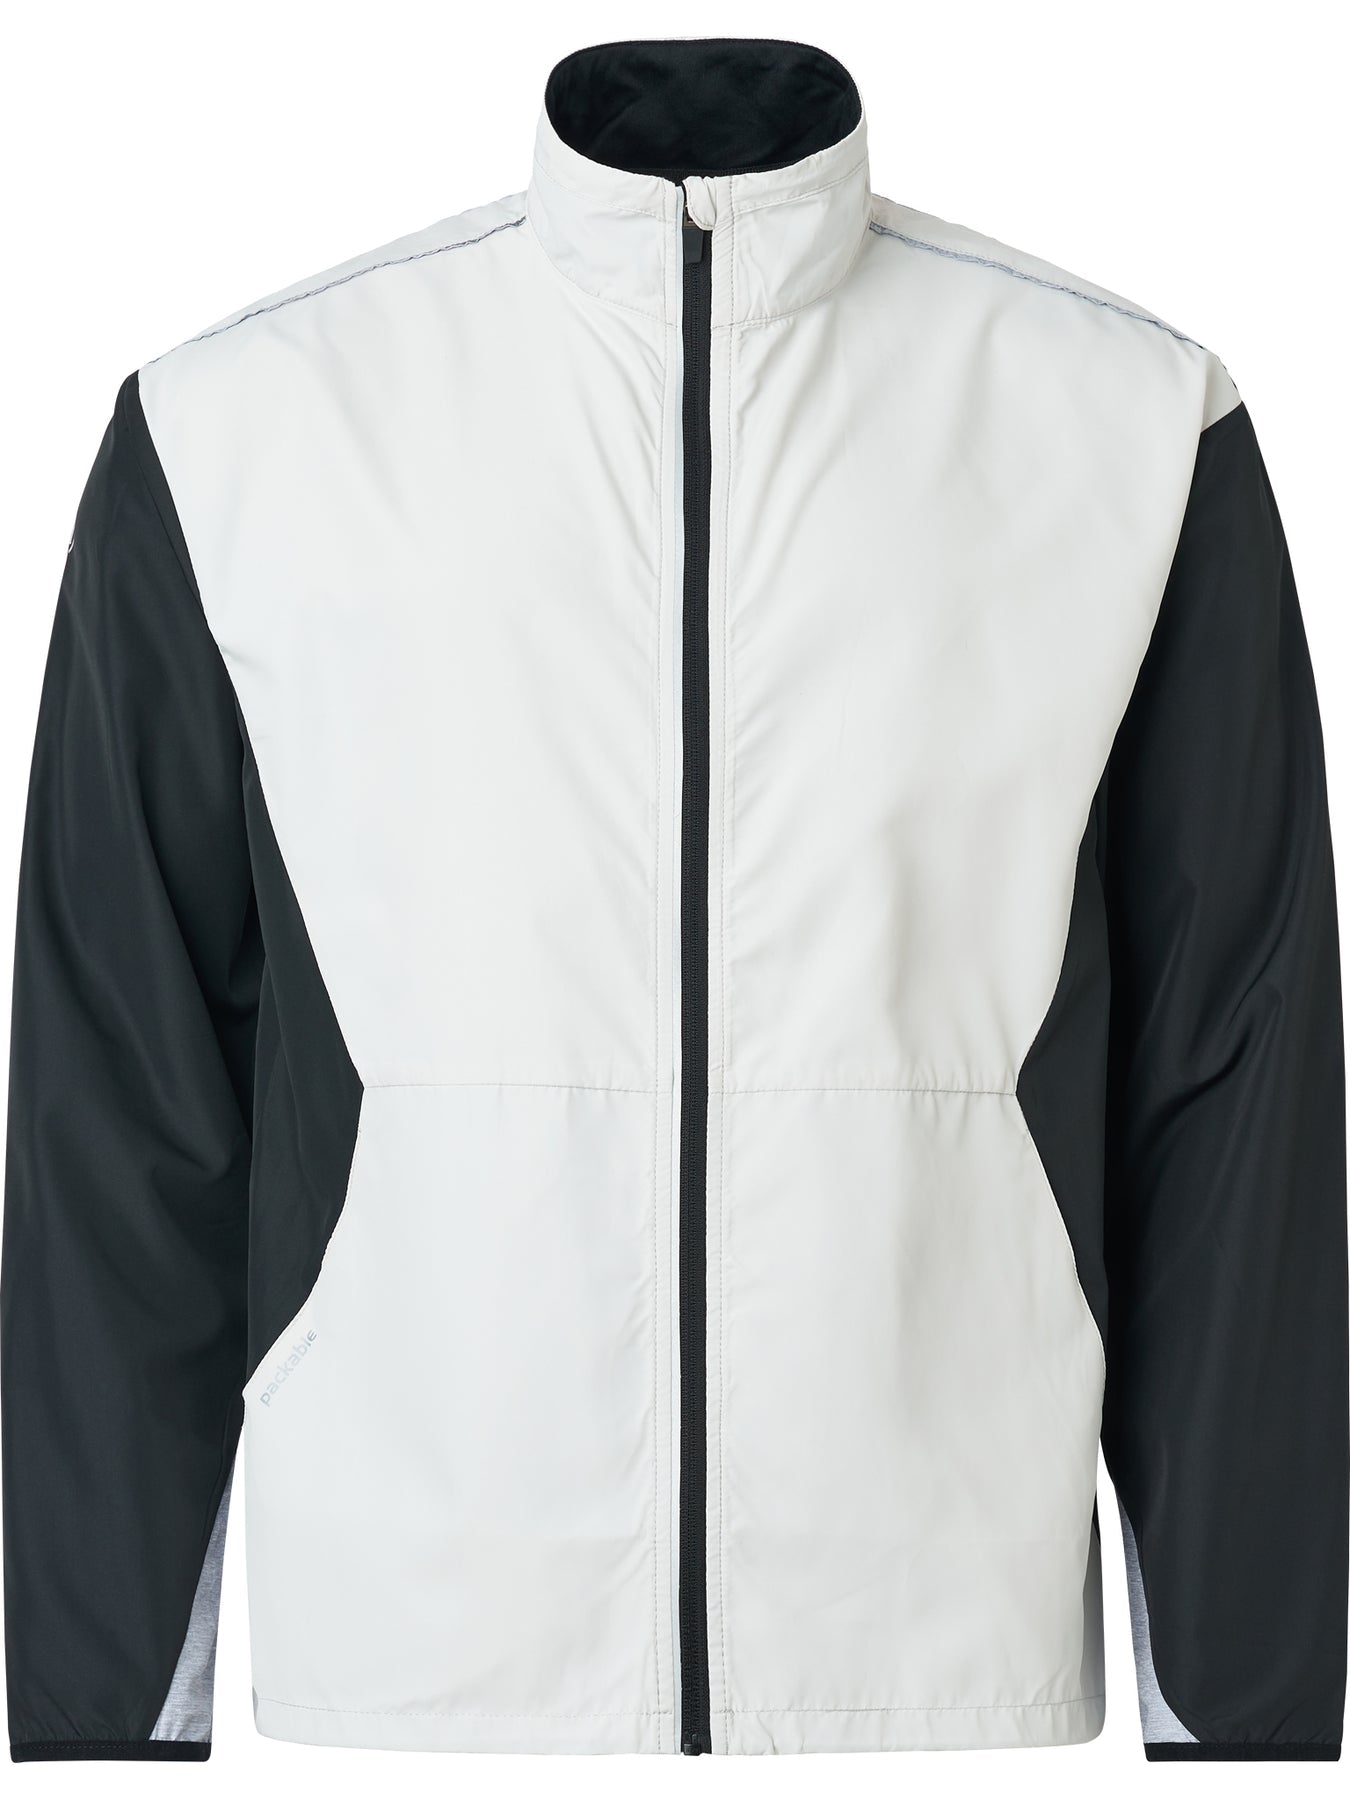 Abacus Sports Wear: Men’s High-Performance Stretch Wind Jacket – Hills